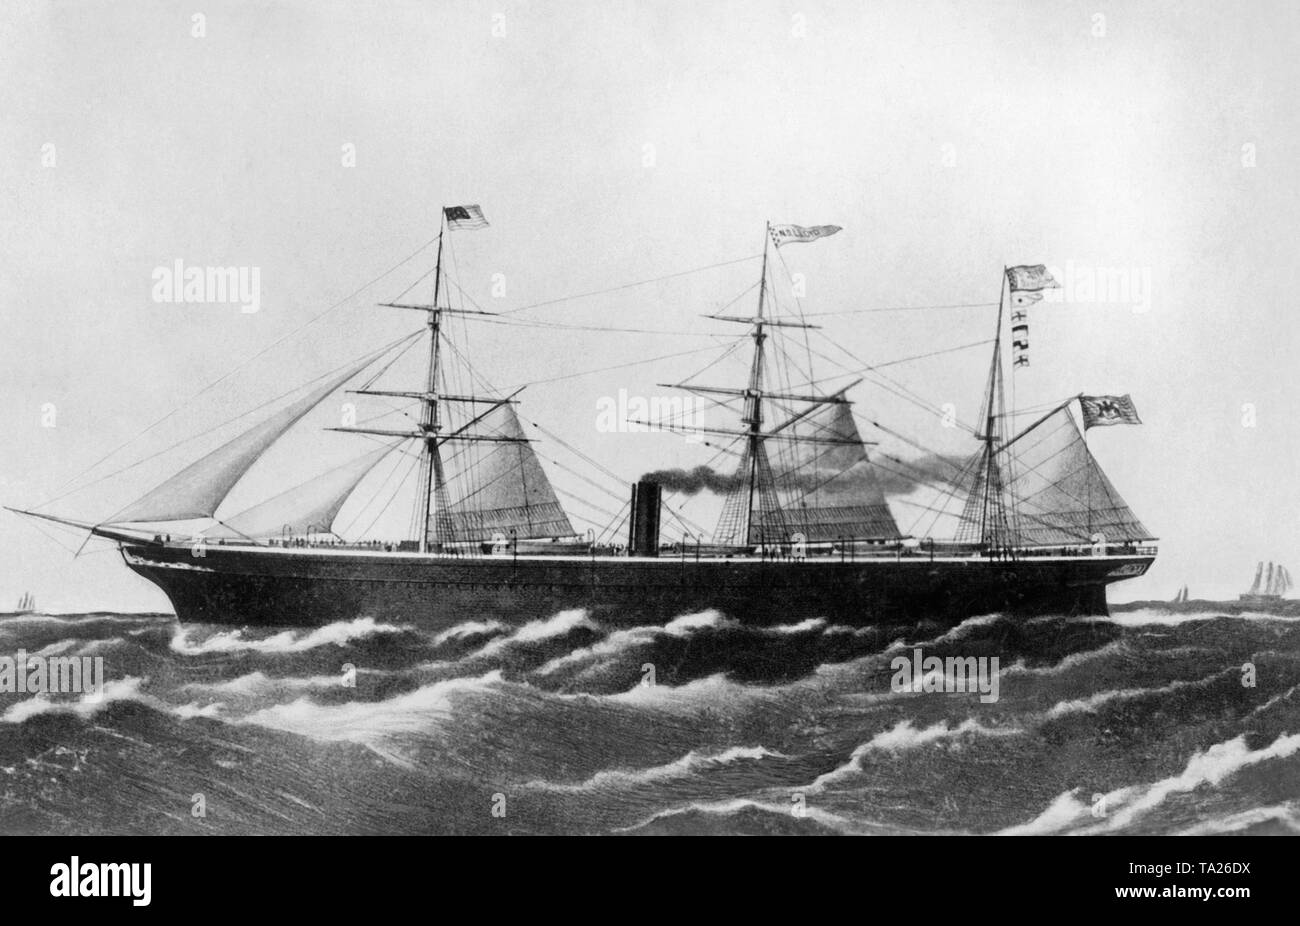 In 1858 the sailing steamer 'Bremen' was the first ship of the Norddeutscher Lloyd, which bore the name 'Bremen'. The 'Bremen' operated on the transatlantic route between Bremen and New York. Stock Photo